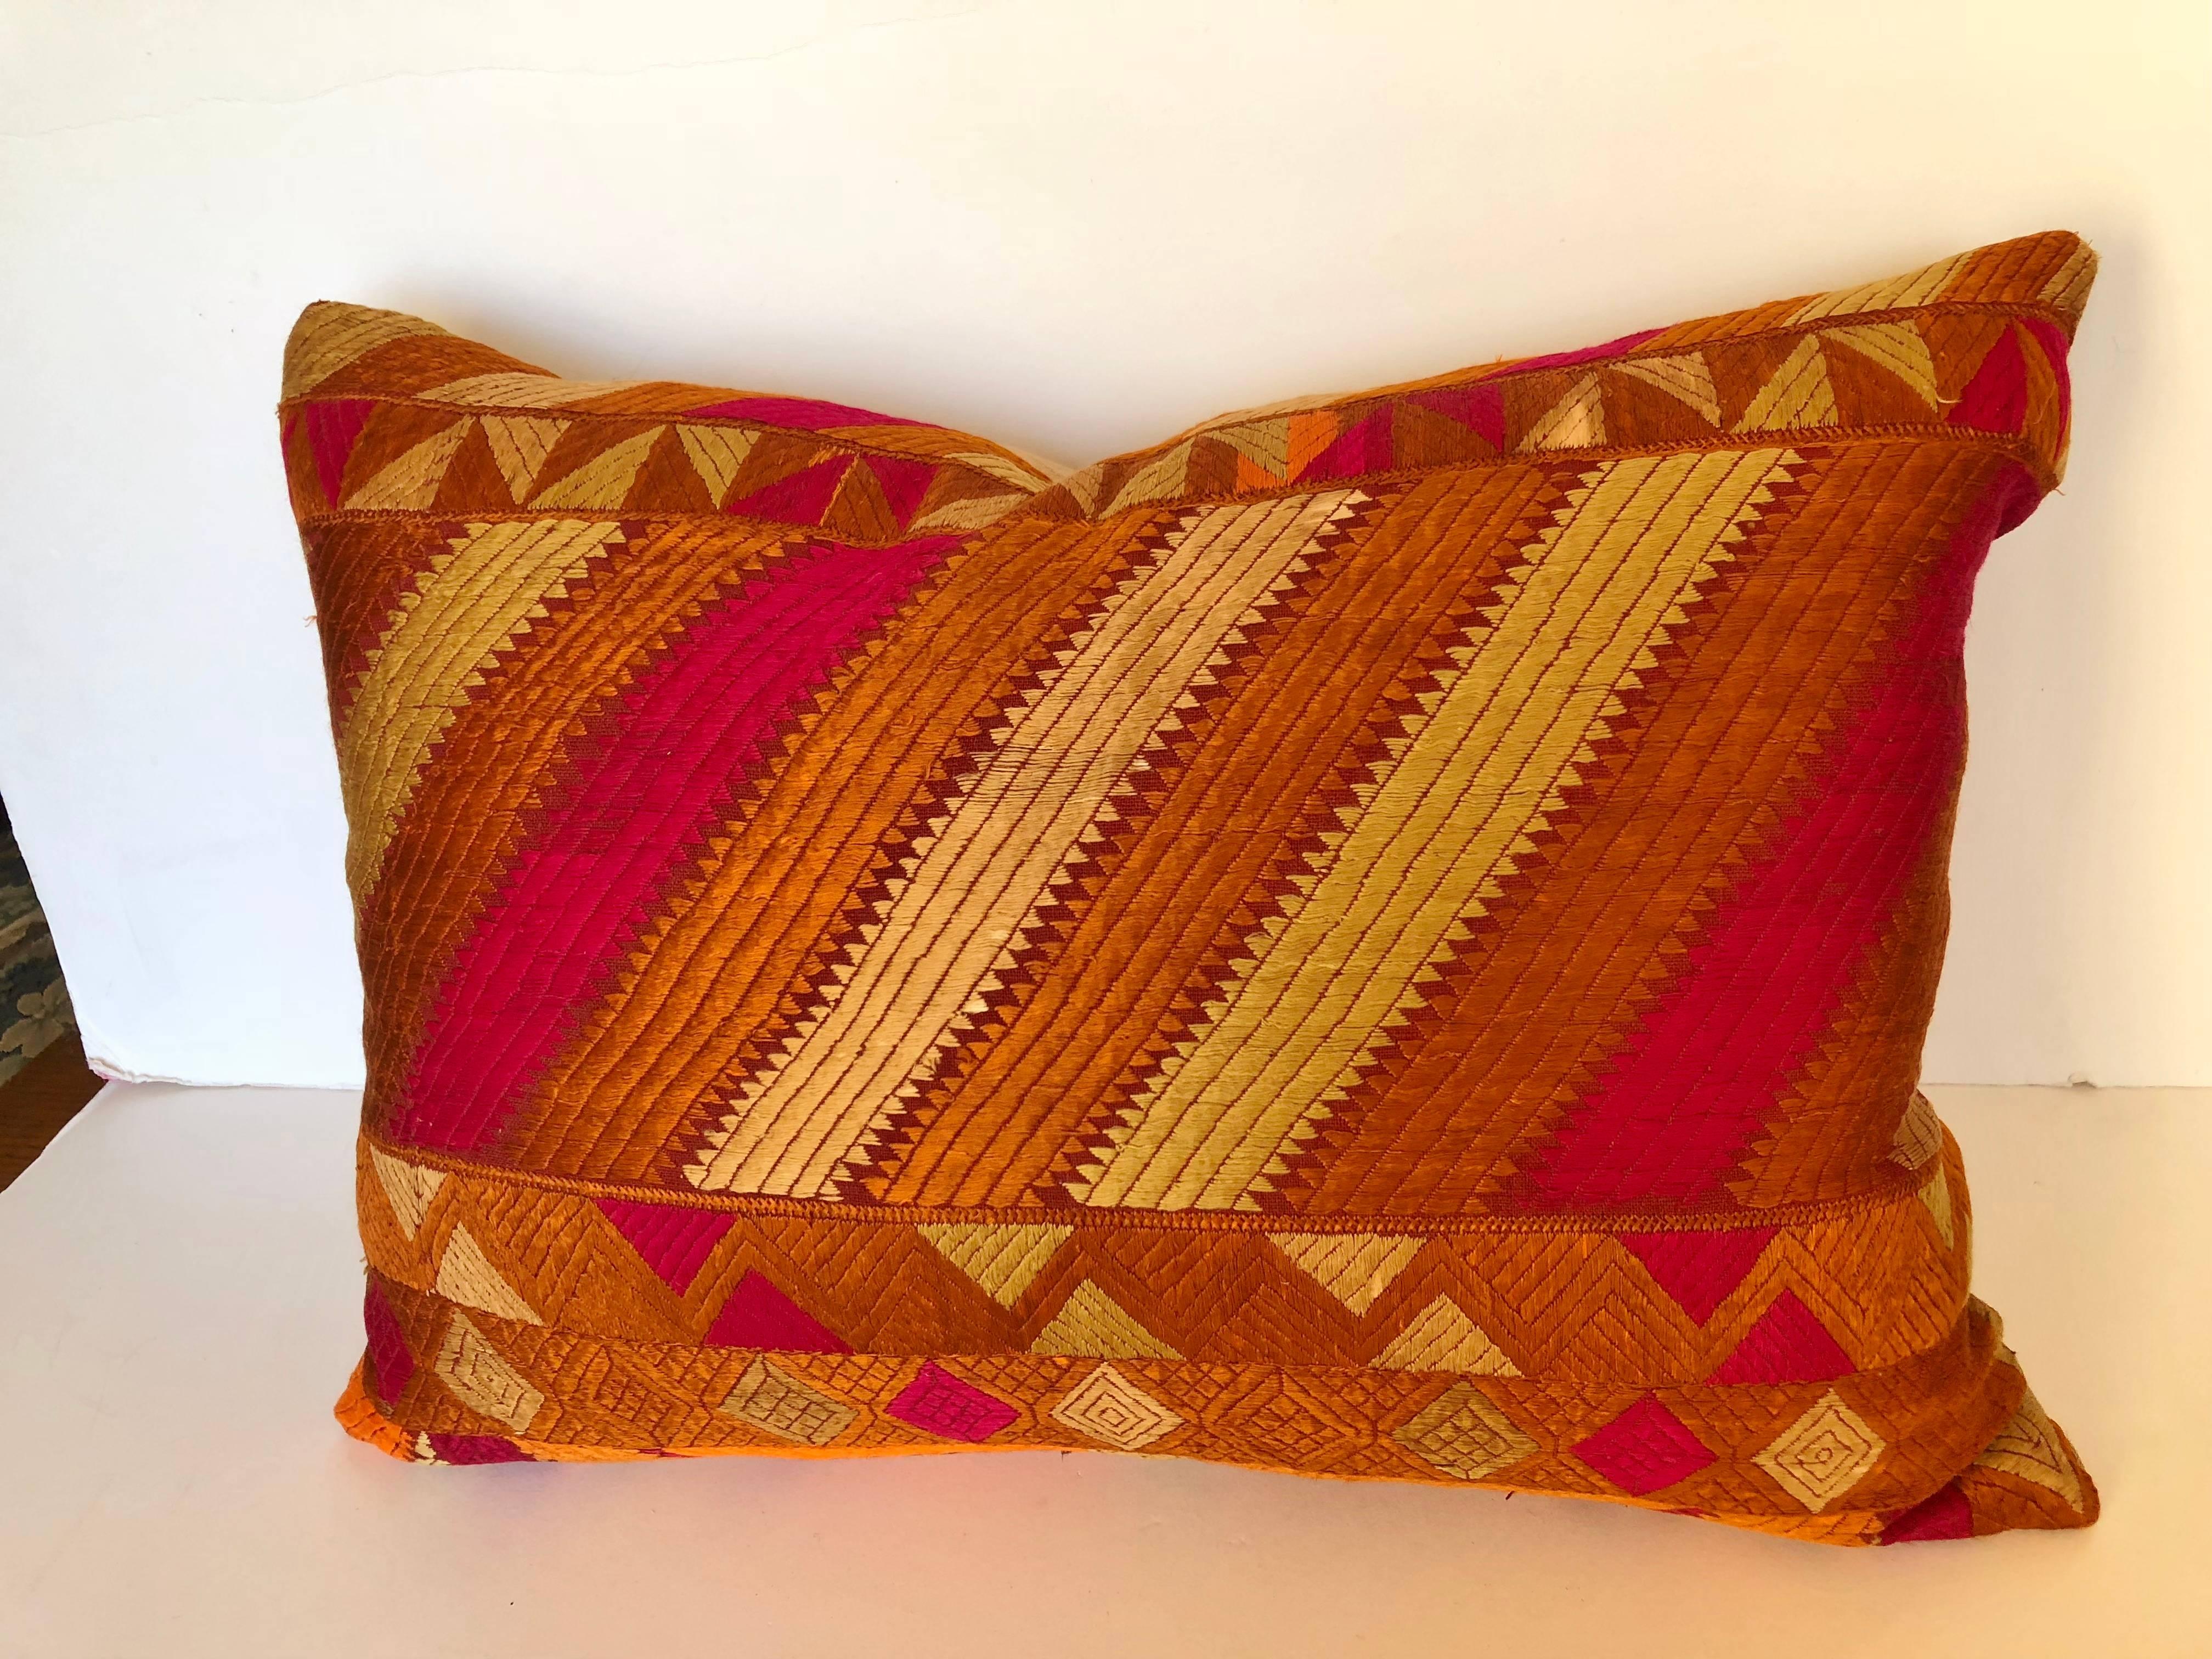 Custom pillow cut from a vintage silk phulkari bagh wedding shawl from Punjab, India. Hand loomed cotton khadi cloth is hand embroidered with vibrant silk threads. The shawl is made by relatives of the young bride for her wedding and other special